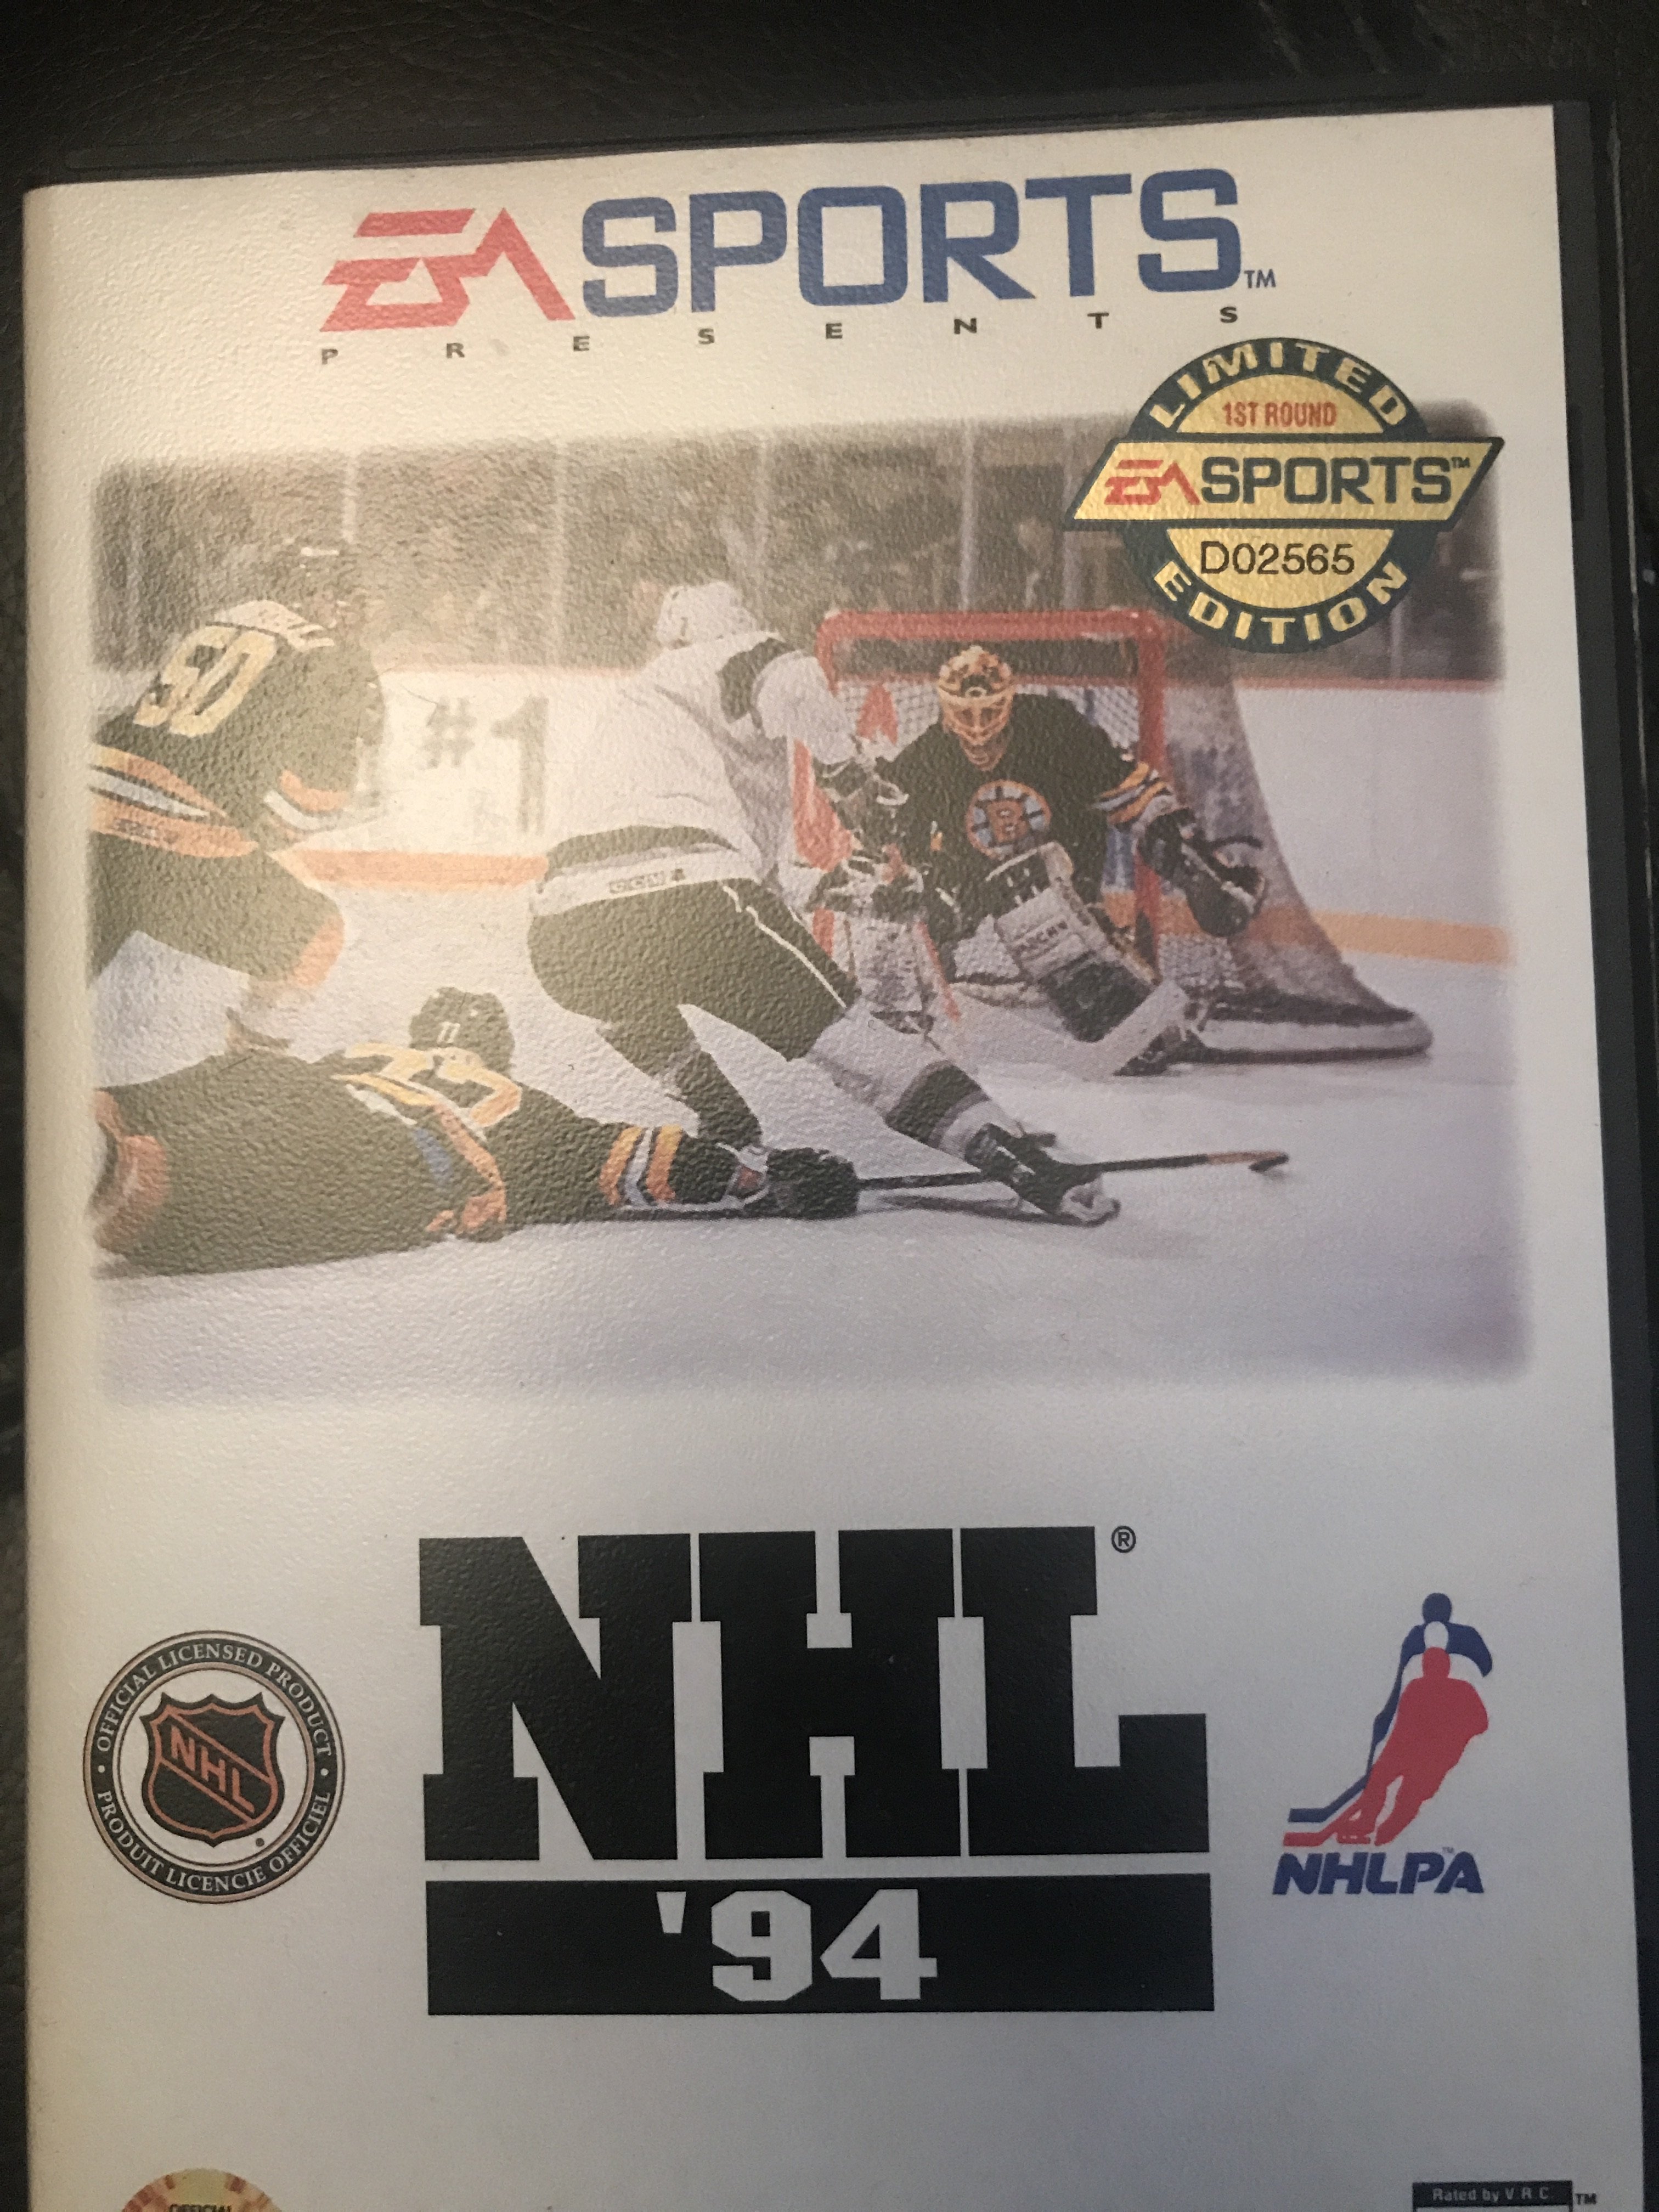 NHL94 Sega Genesis Limited Edition 1st Round Serial Numbers - General NHL 94 Discussion